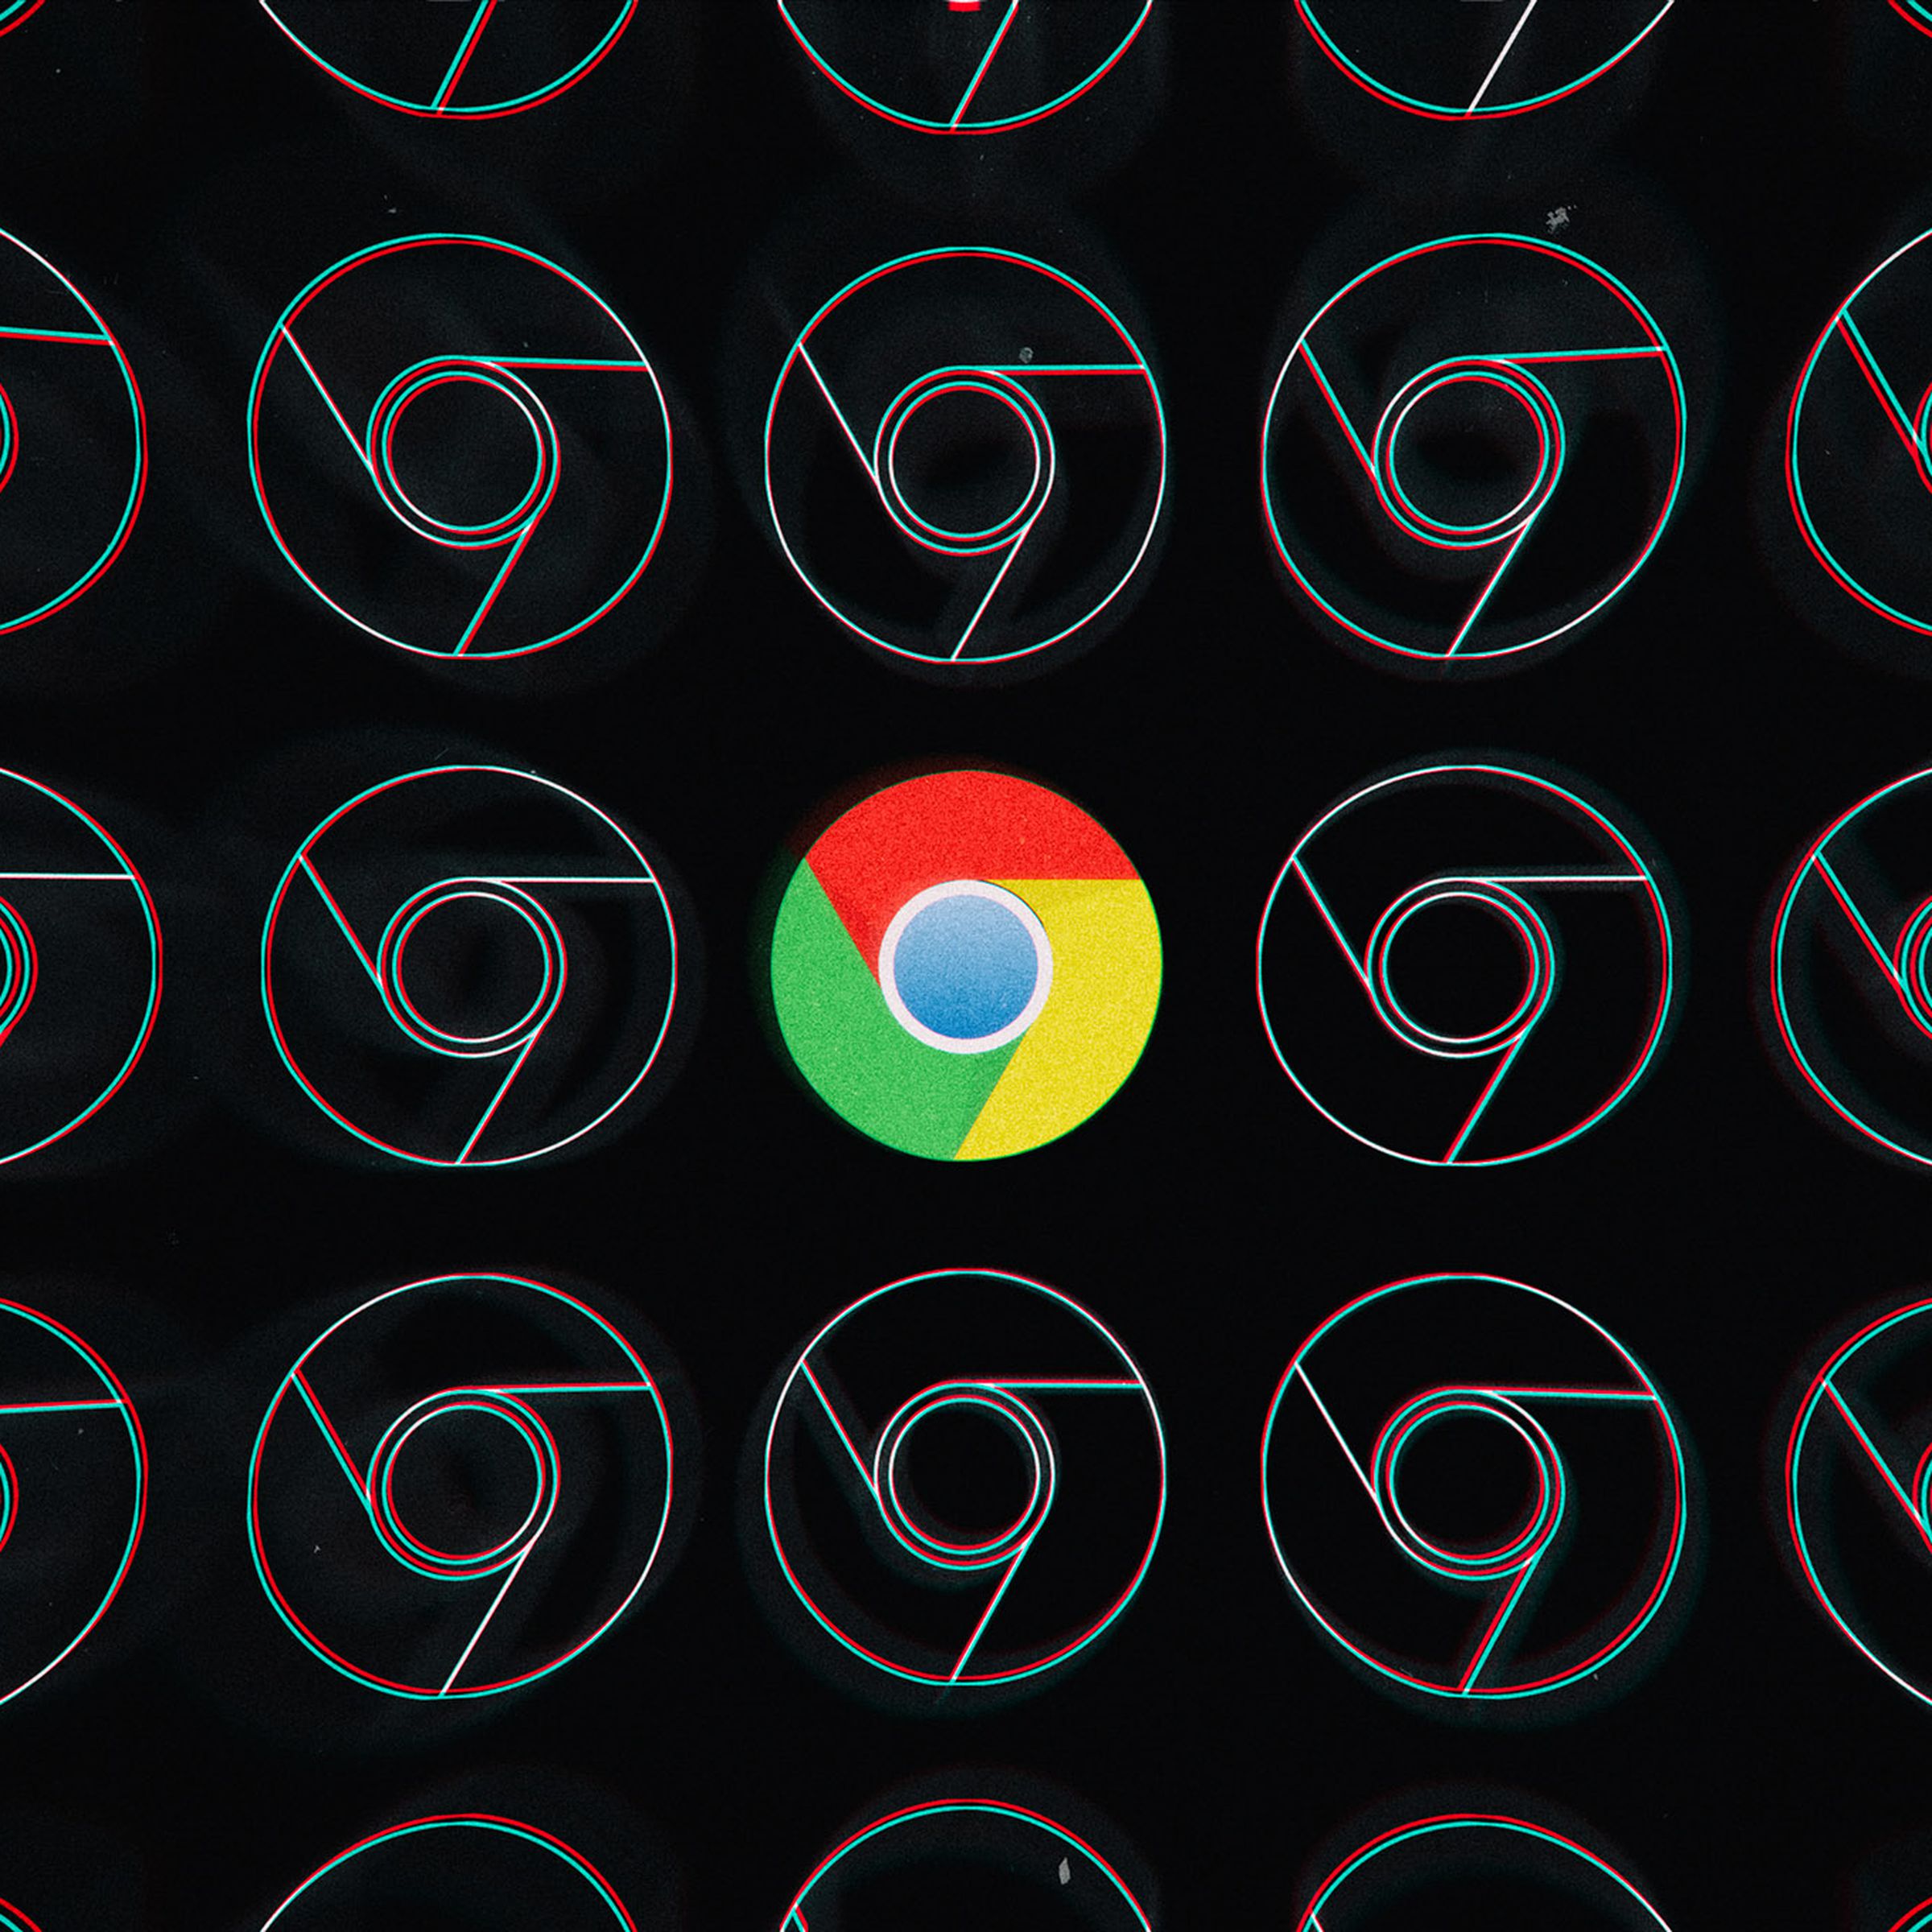 Stock imagery of the Chrome logo.